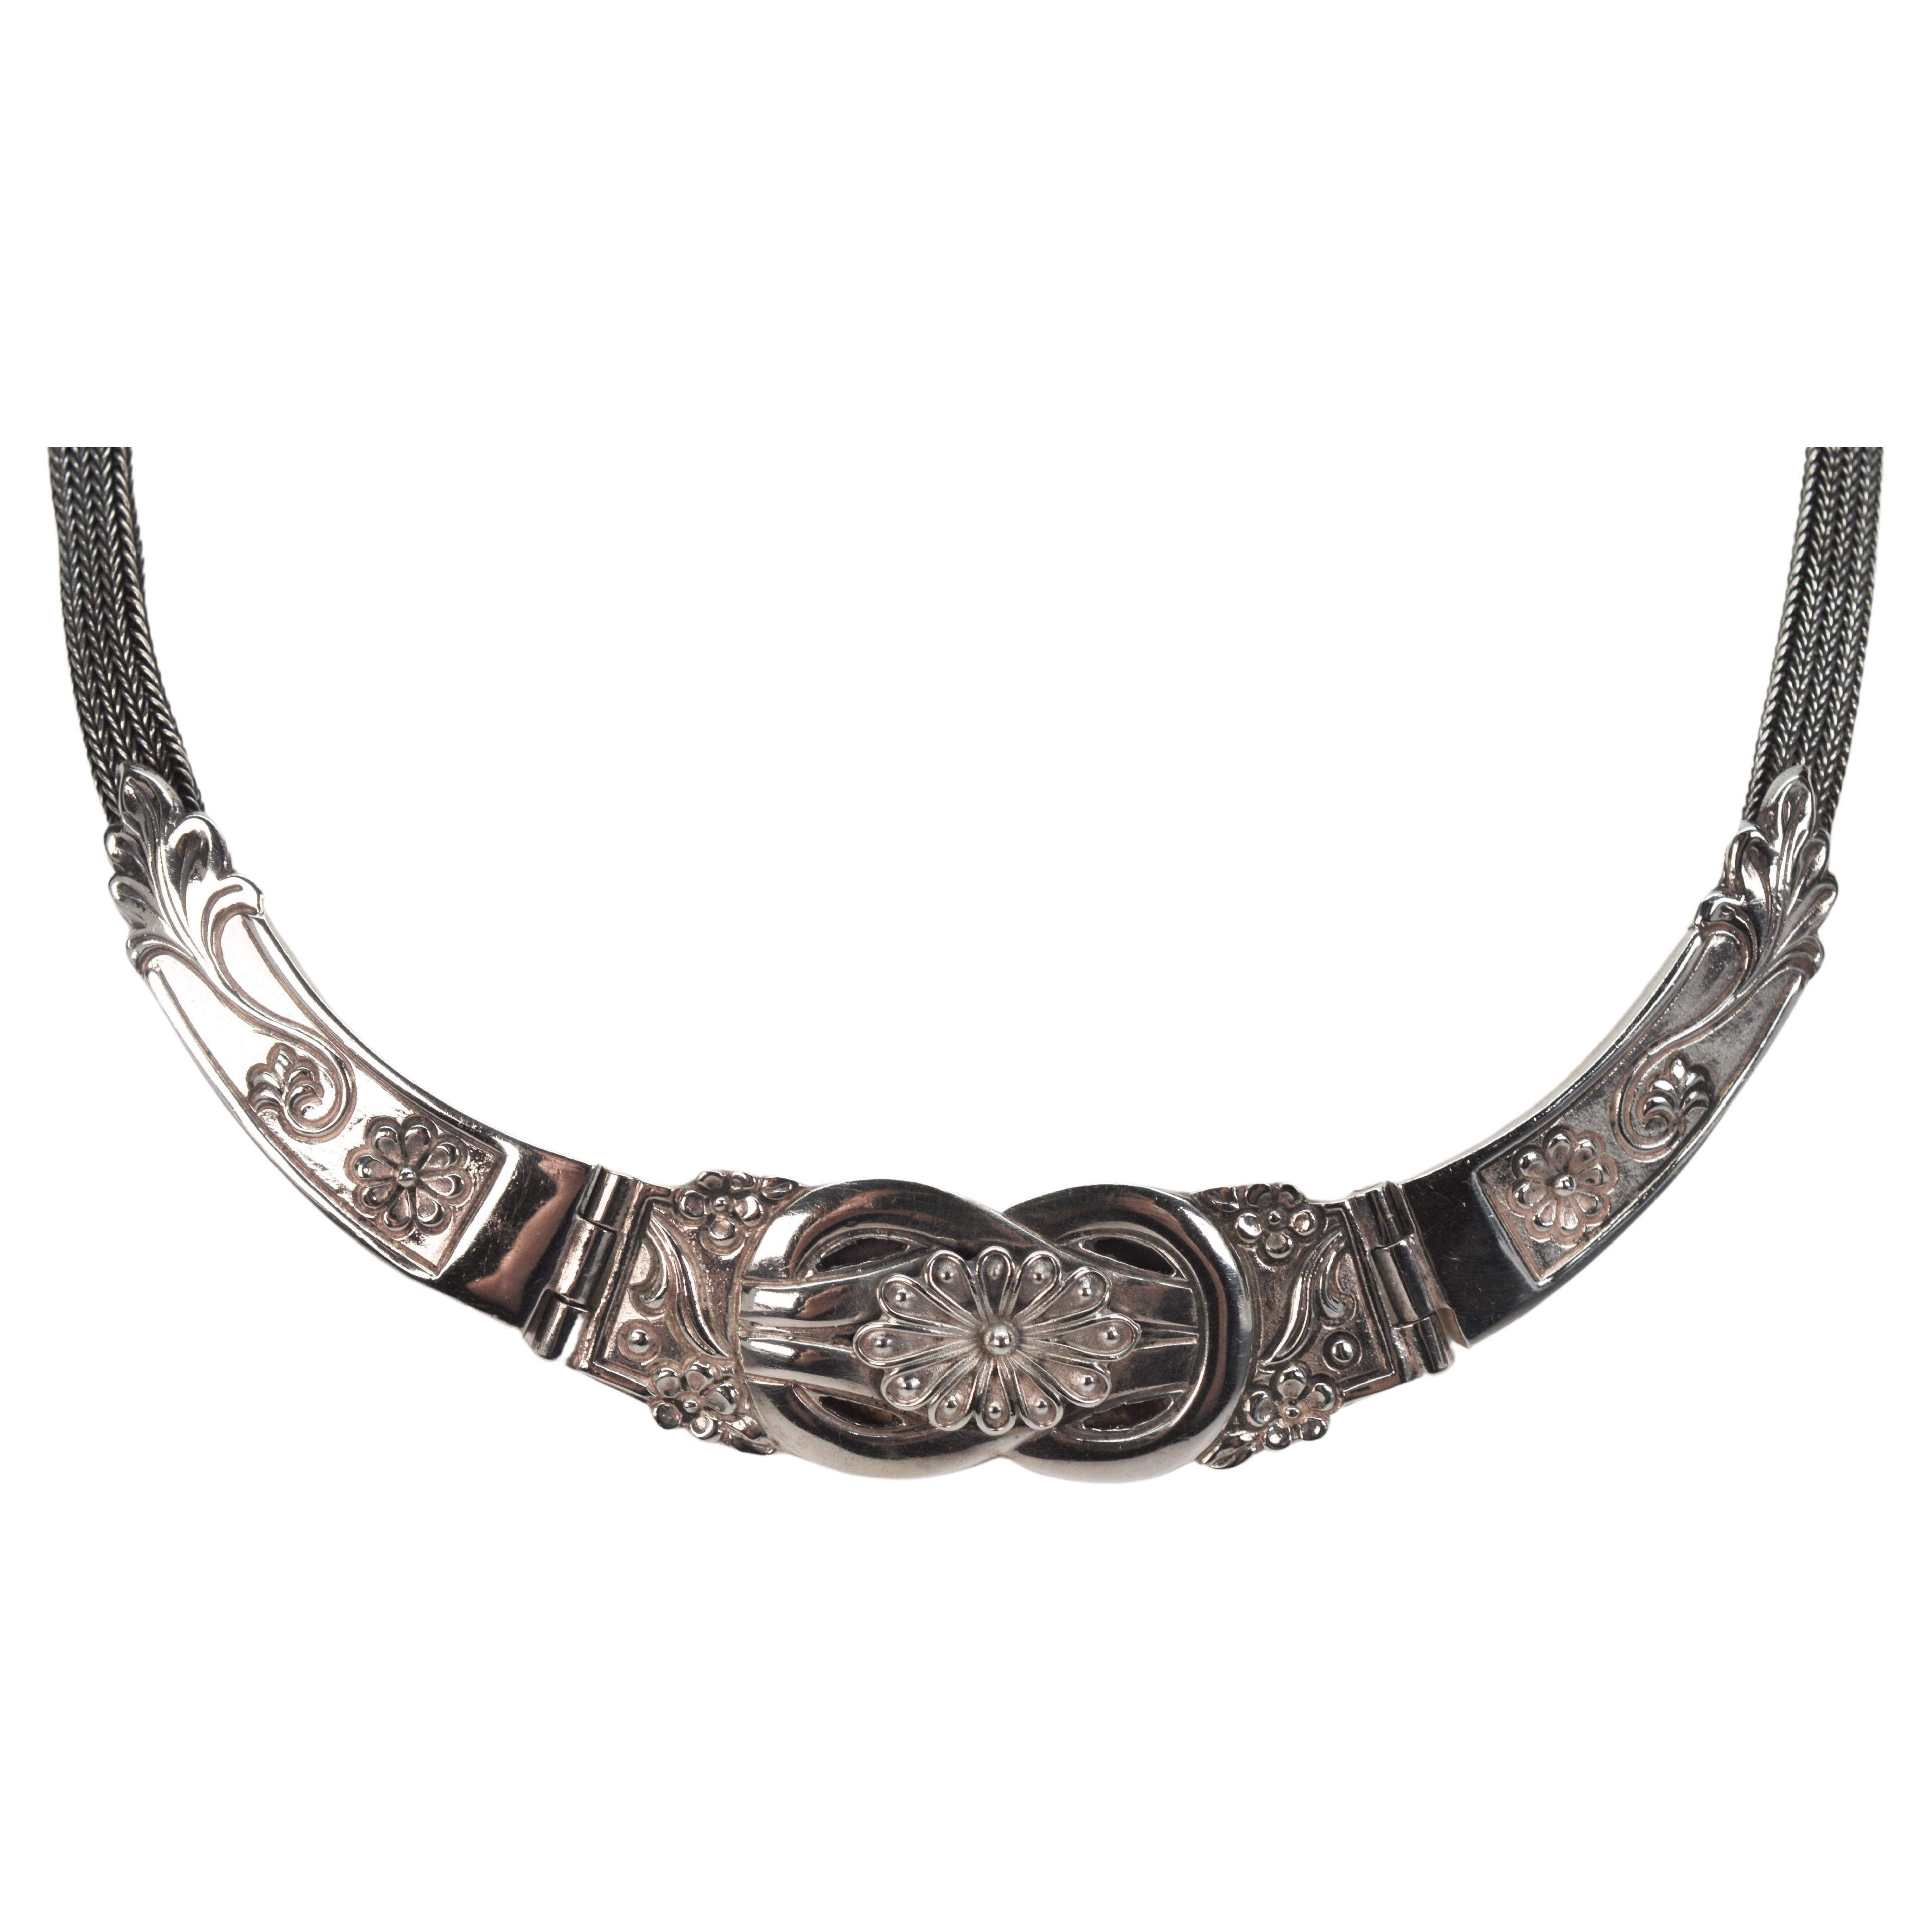 Three decorative floral hinged panels of die struck sterling silver create the front placket of this vintage collar necklace. Soft woven quarter inch mesh silver chain continues around the back of the neckline to the hook and eye closure that is